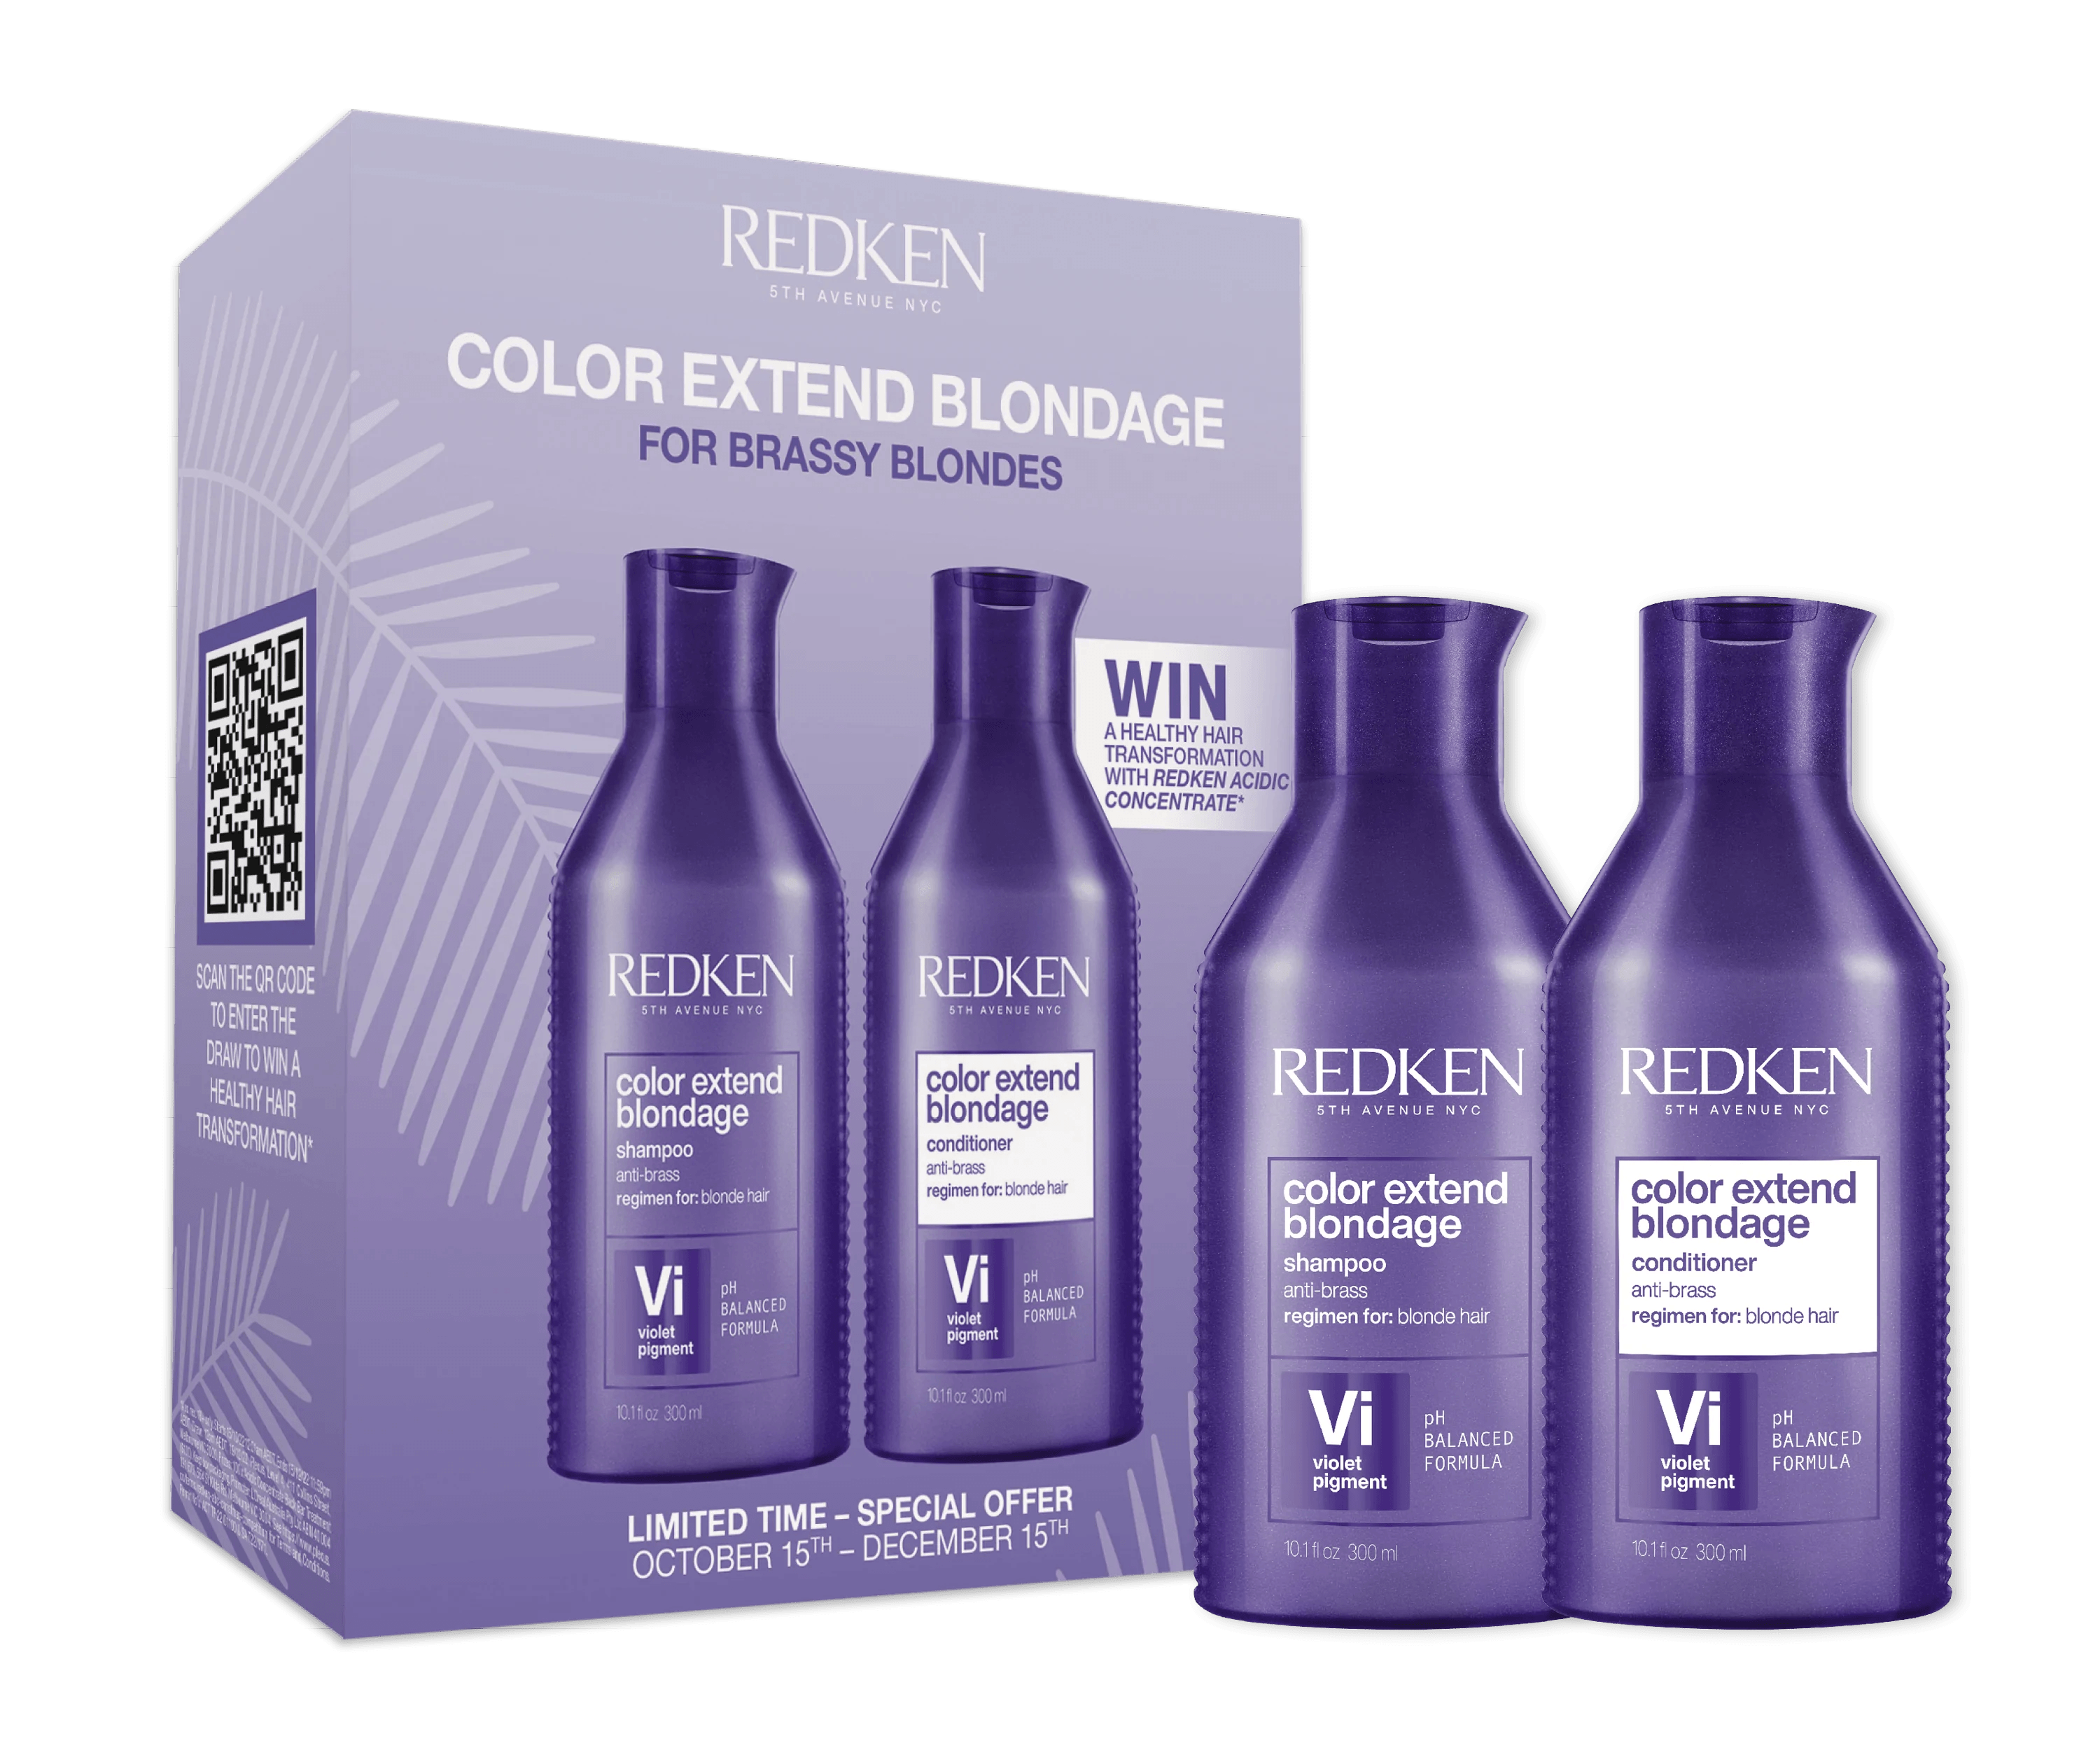 4. Redken Color Extend Blondage Shampoo and Conditioner - wide 8